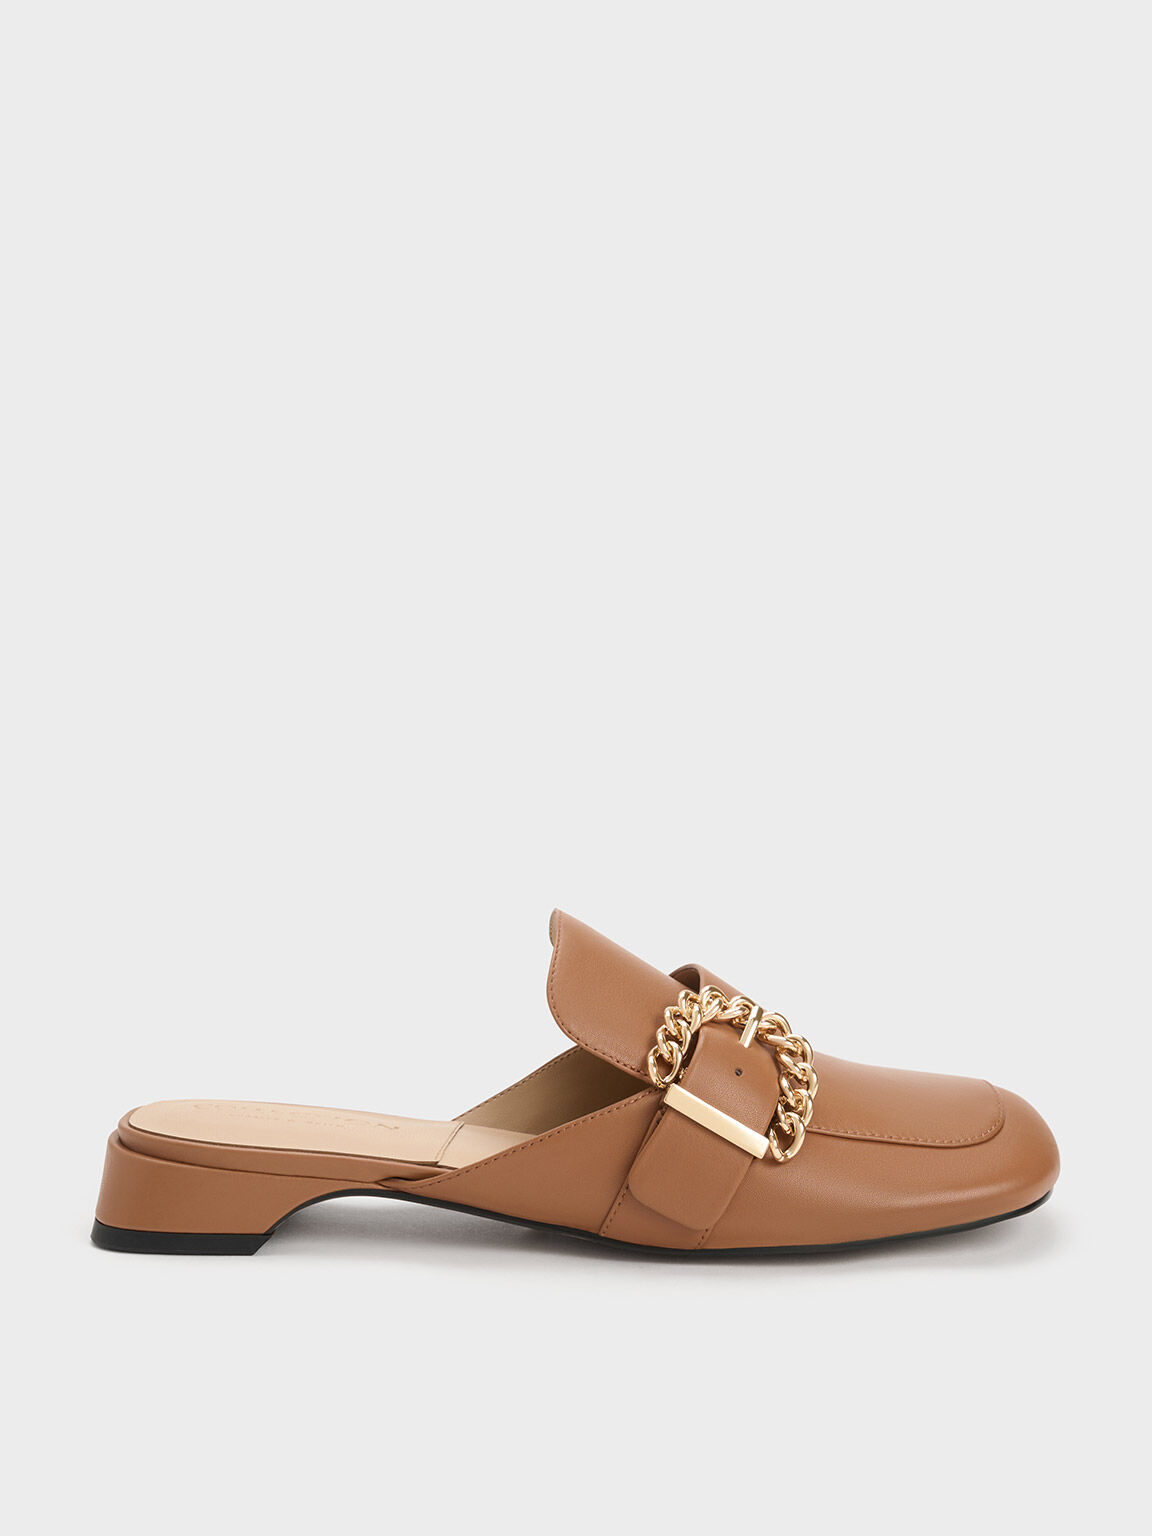 Chain-Buckled Leather Mules, Brown, hi-res